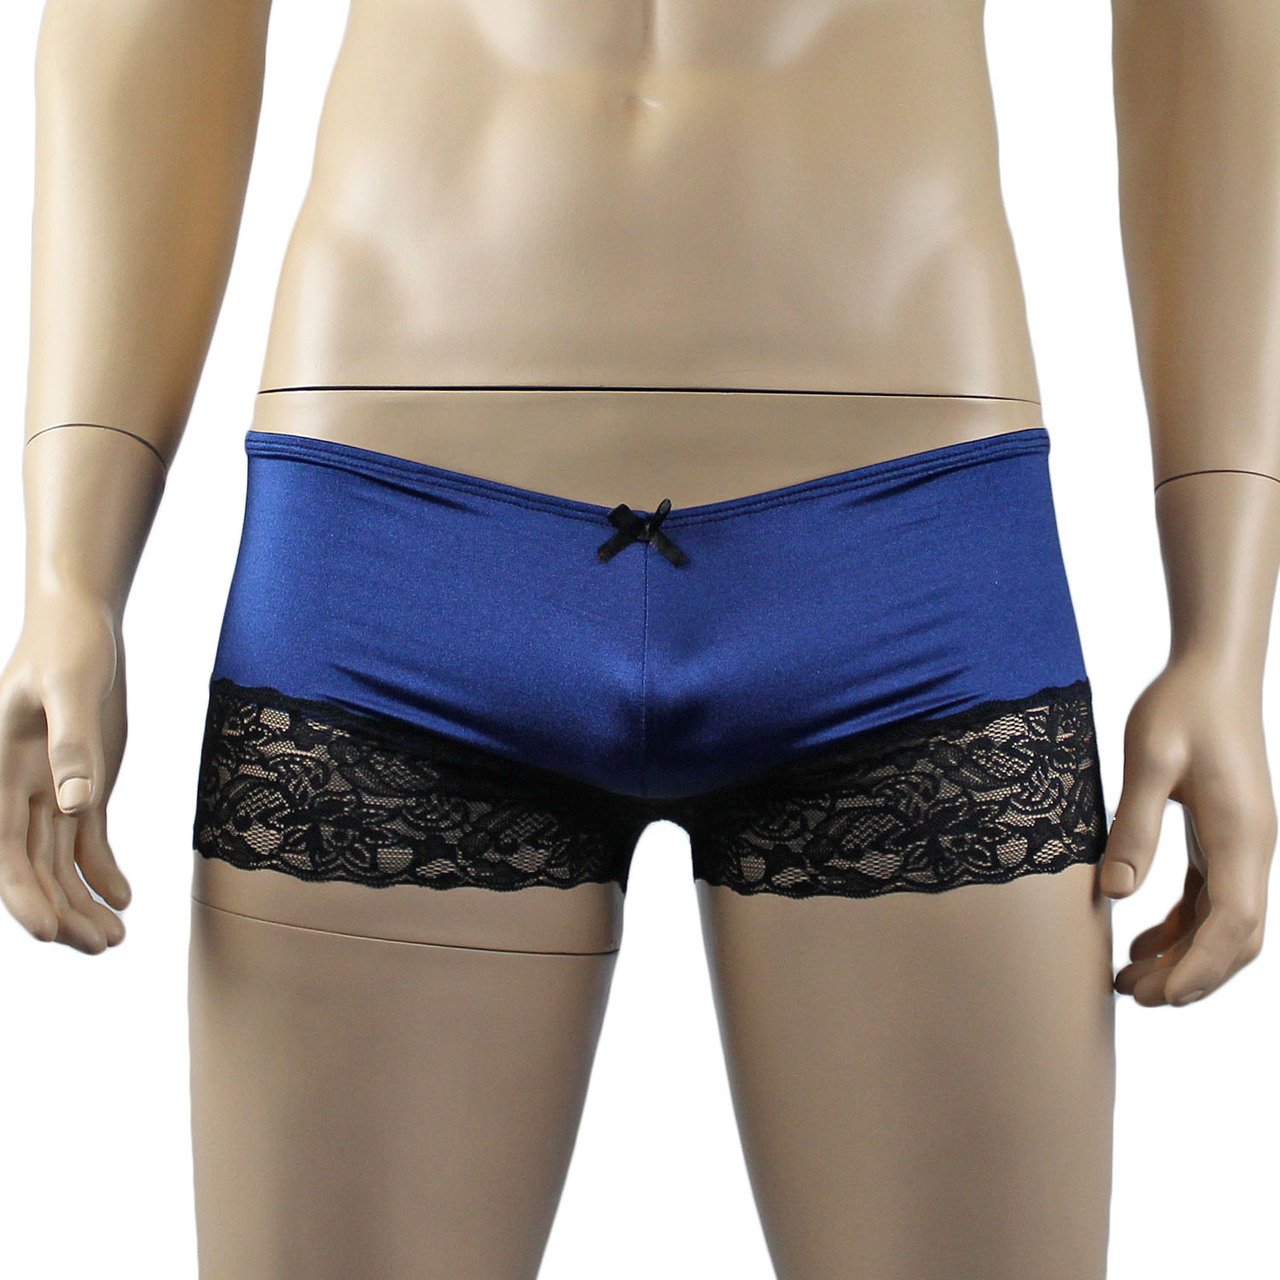 Mens Bra top and Boxer Briefs with Lace Trim (navy & black plus other colours)